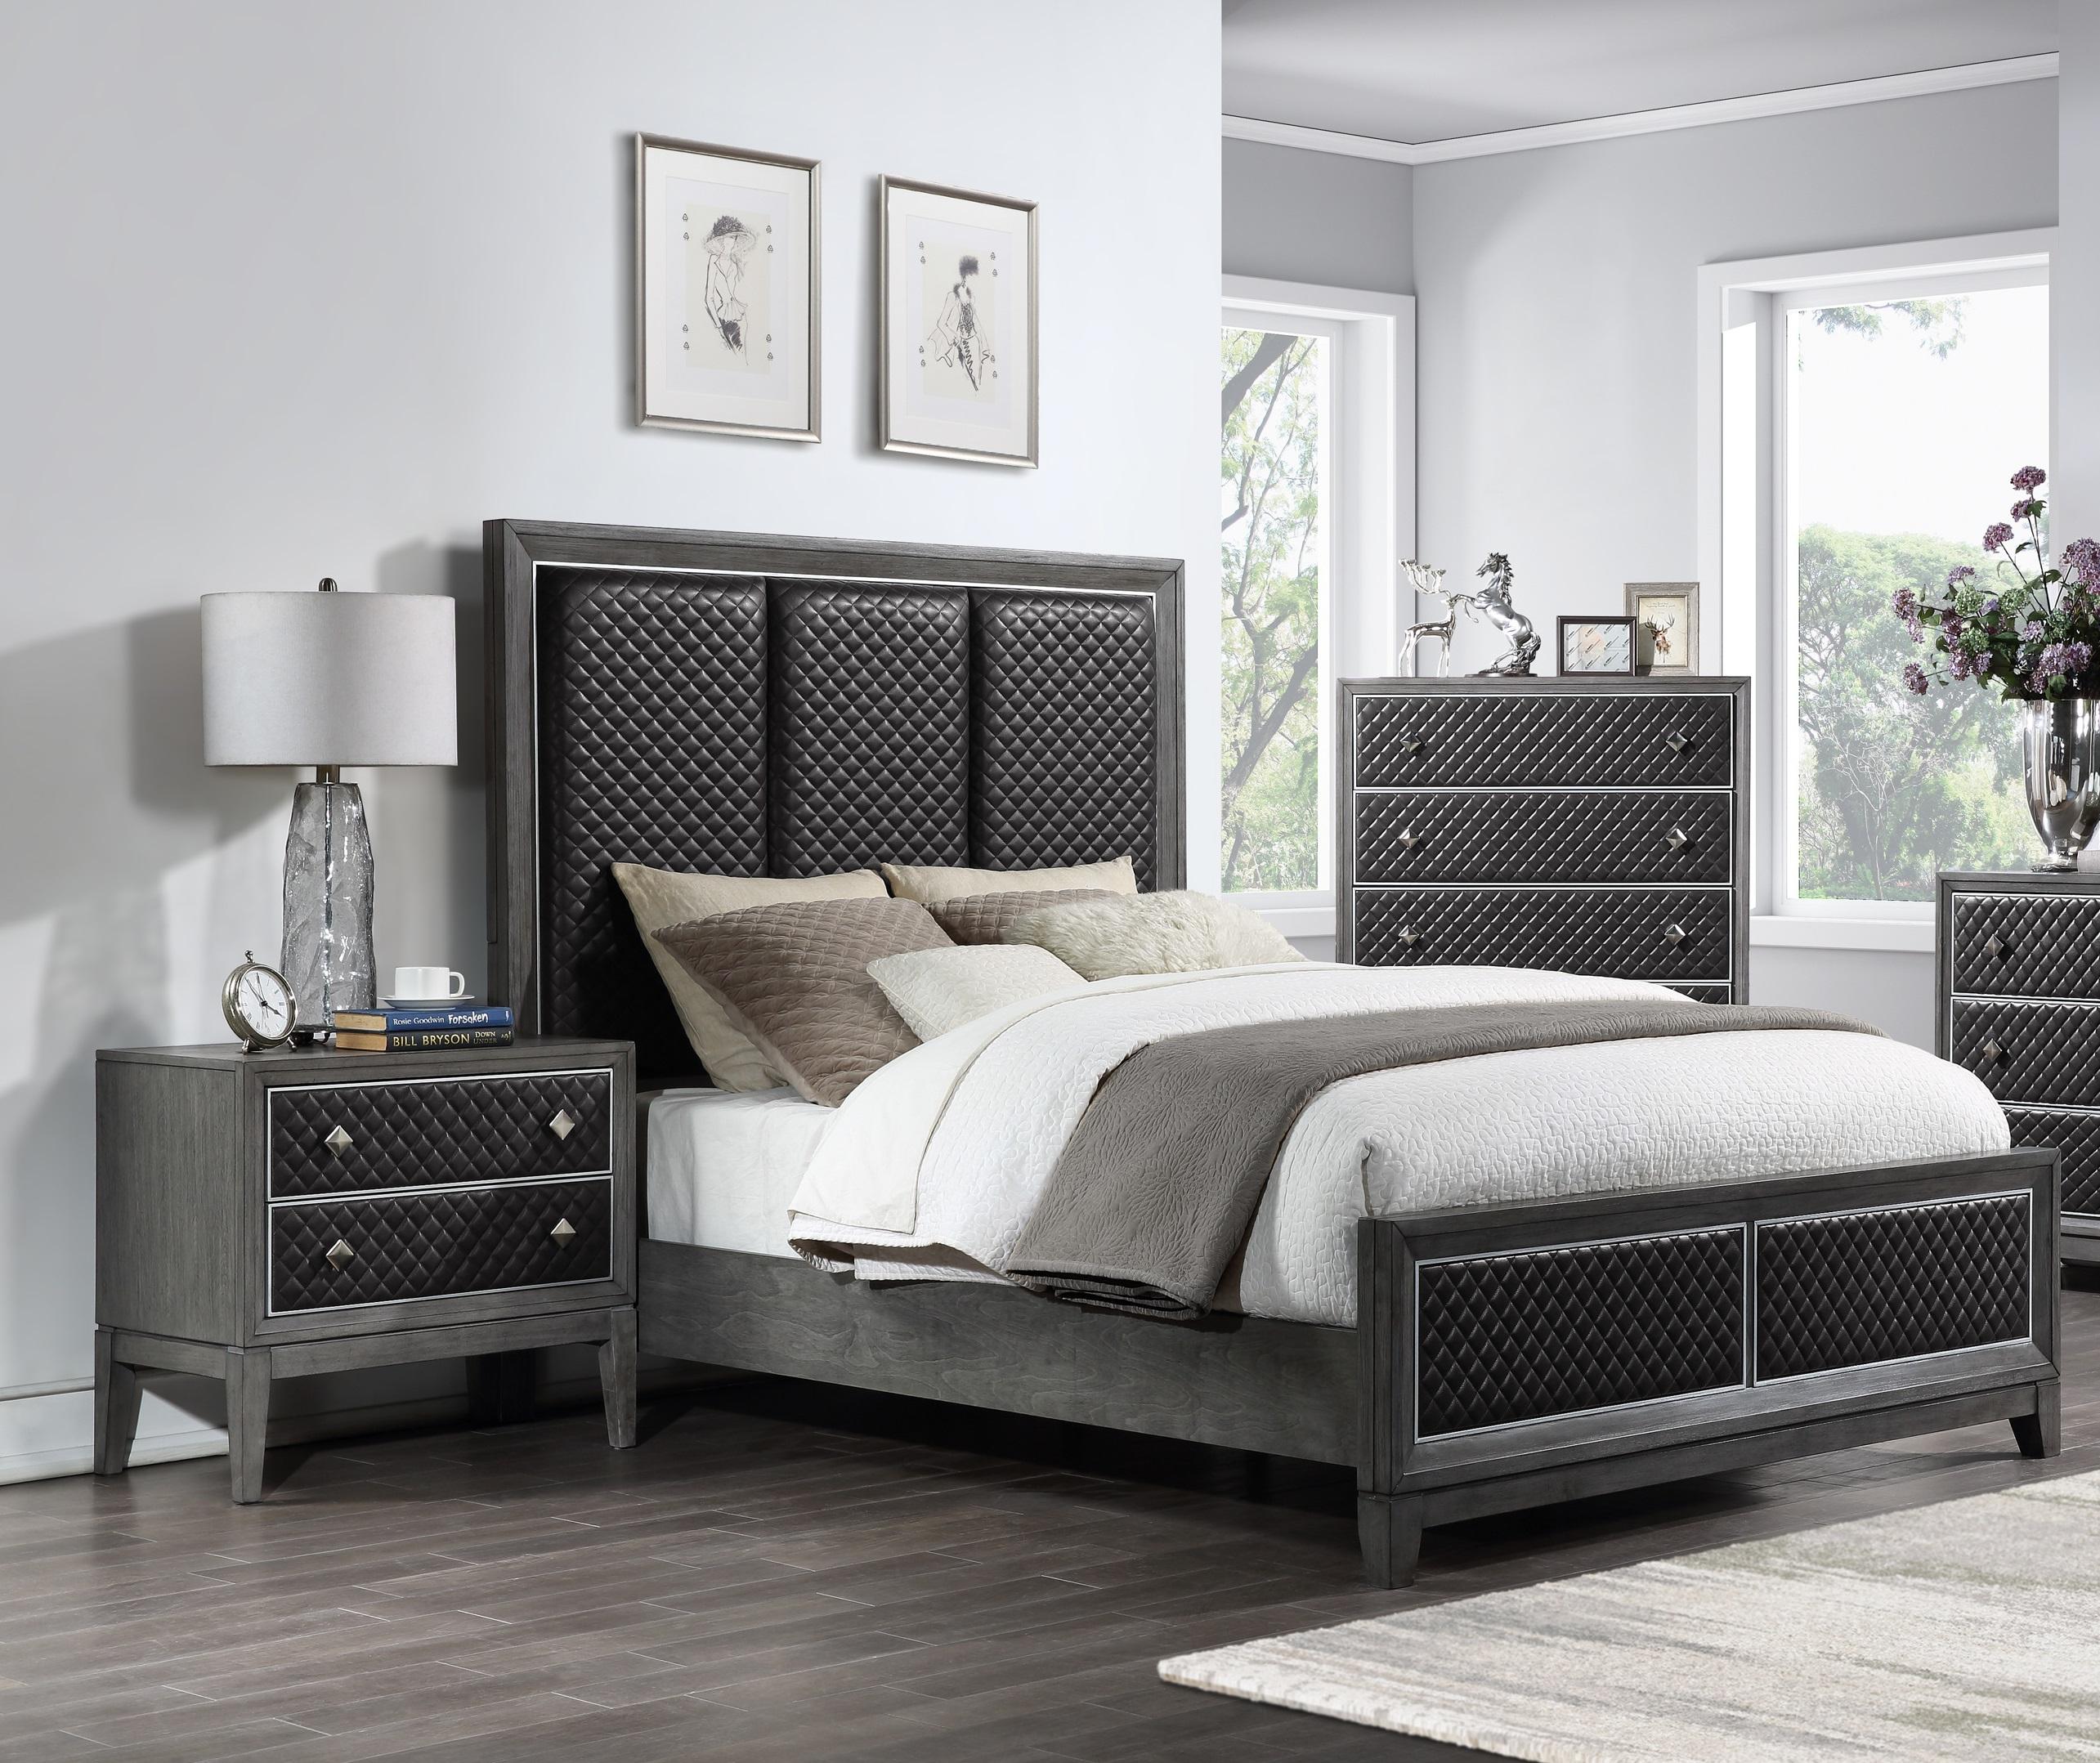 Modern Bed and 2 Nightstands Set 1566GYK-1CK*-3PC West End 1566GYK-1CK*-3PC in Gray Faux Leather